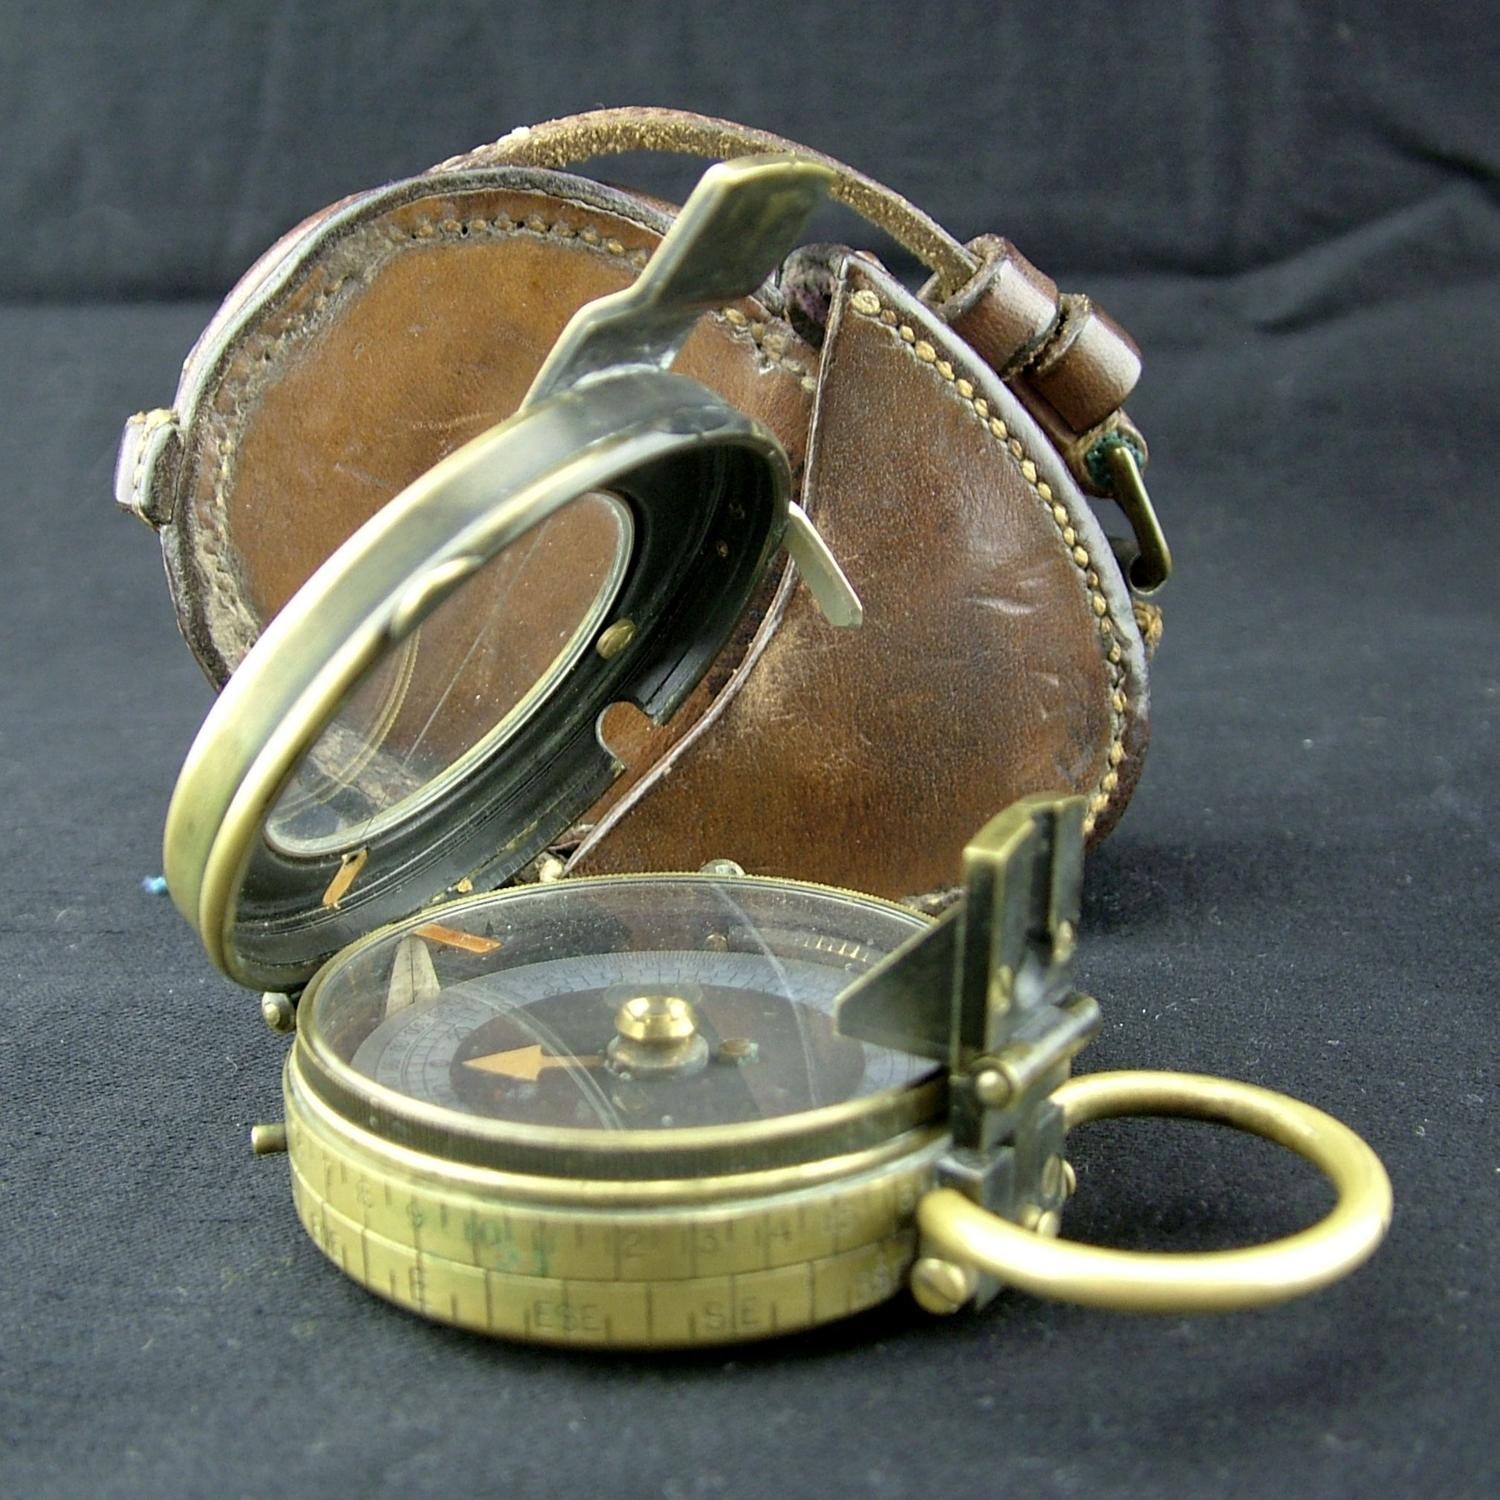 WW1 British Army Verners MK.VII marching compass - history